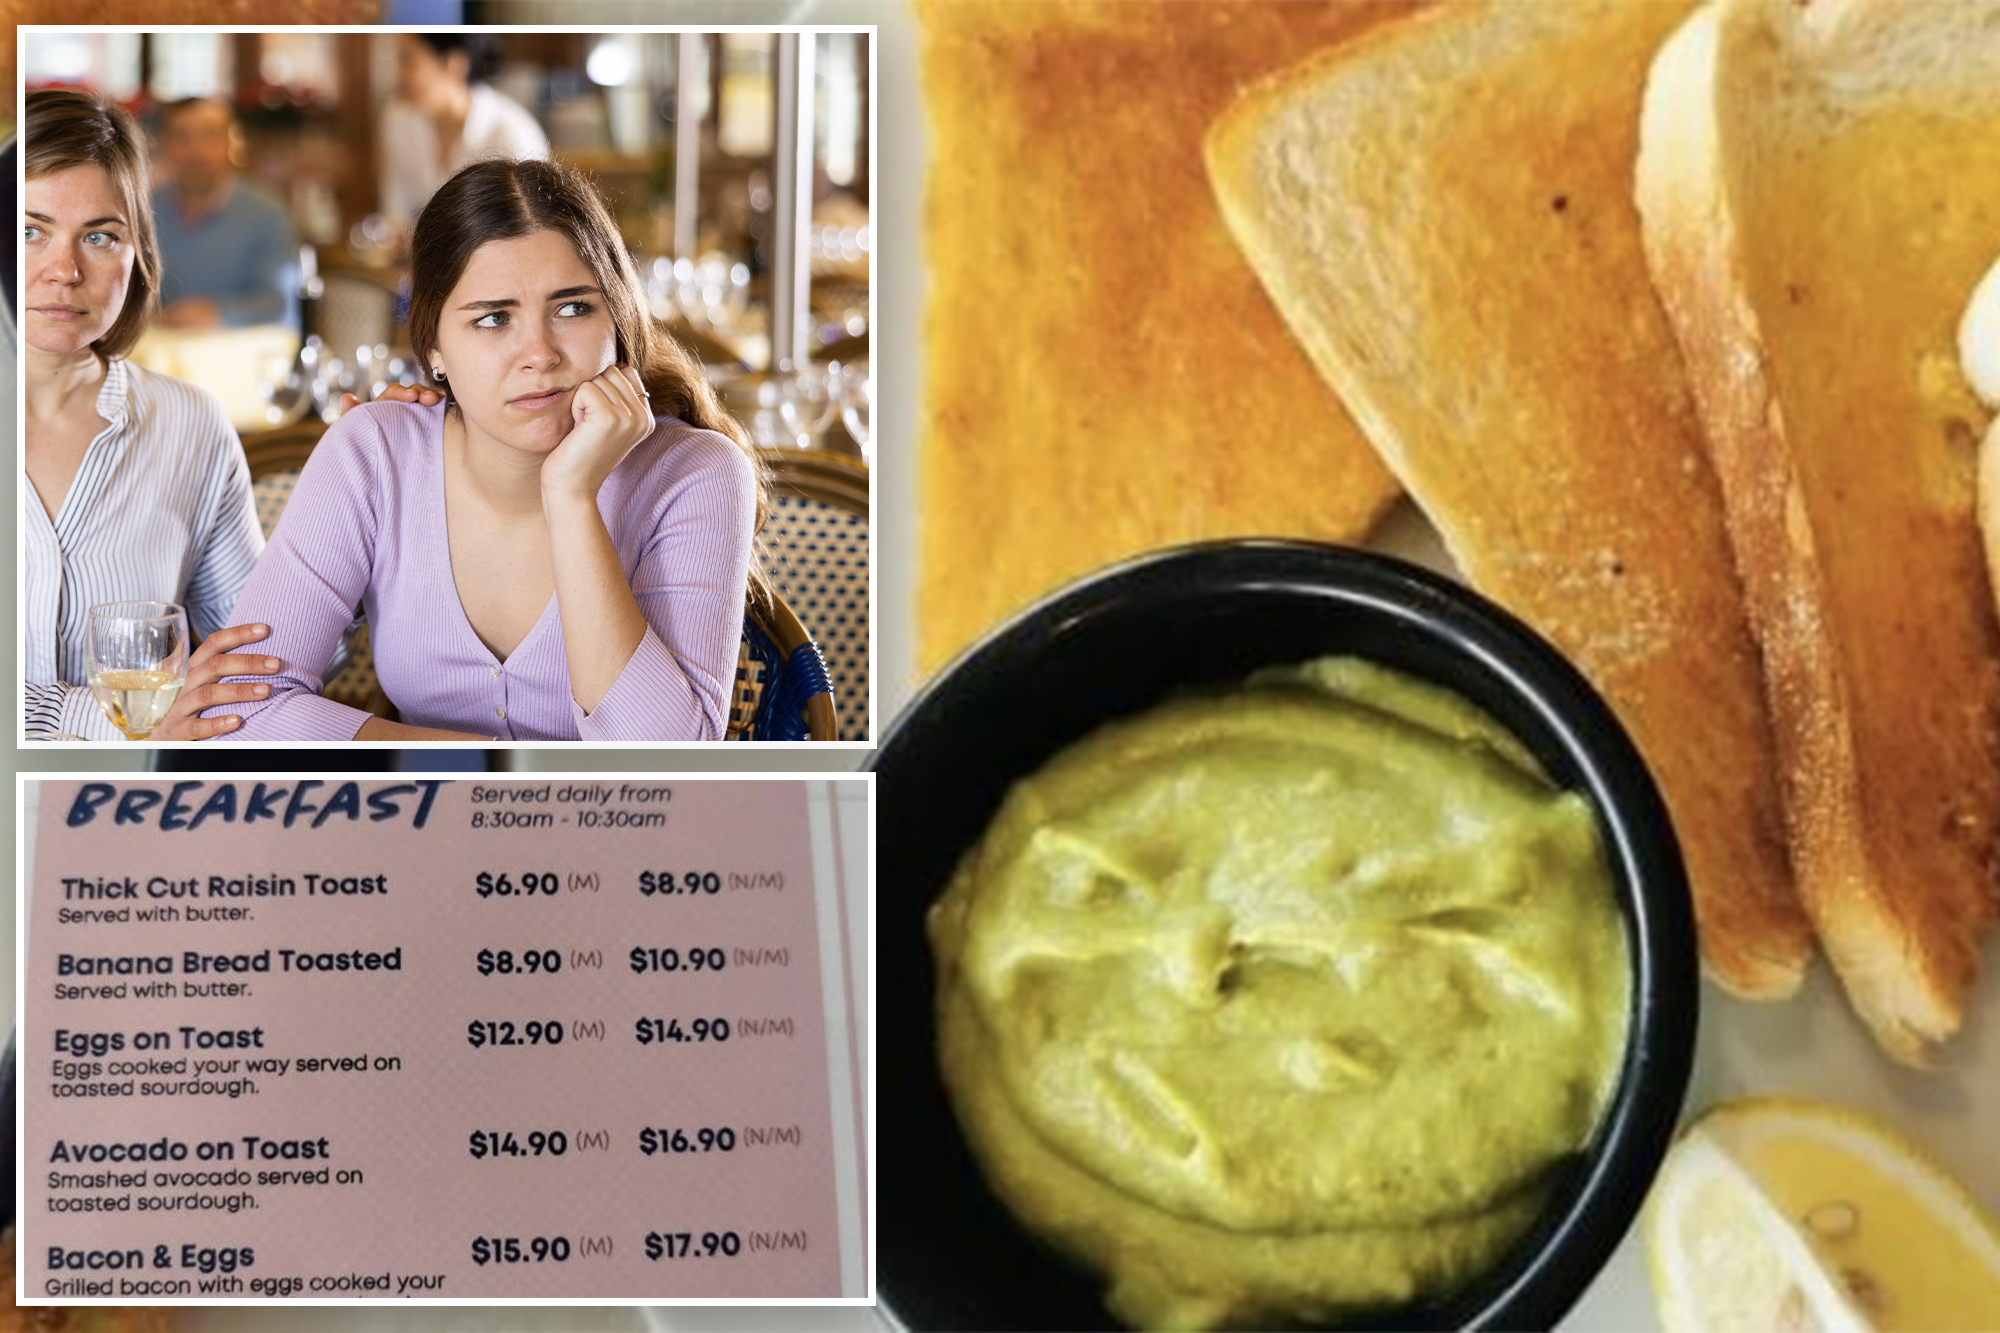 A woman sitting at a table with a bowl of food and a menu, featuring avocado toast